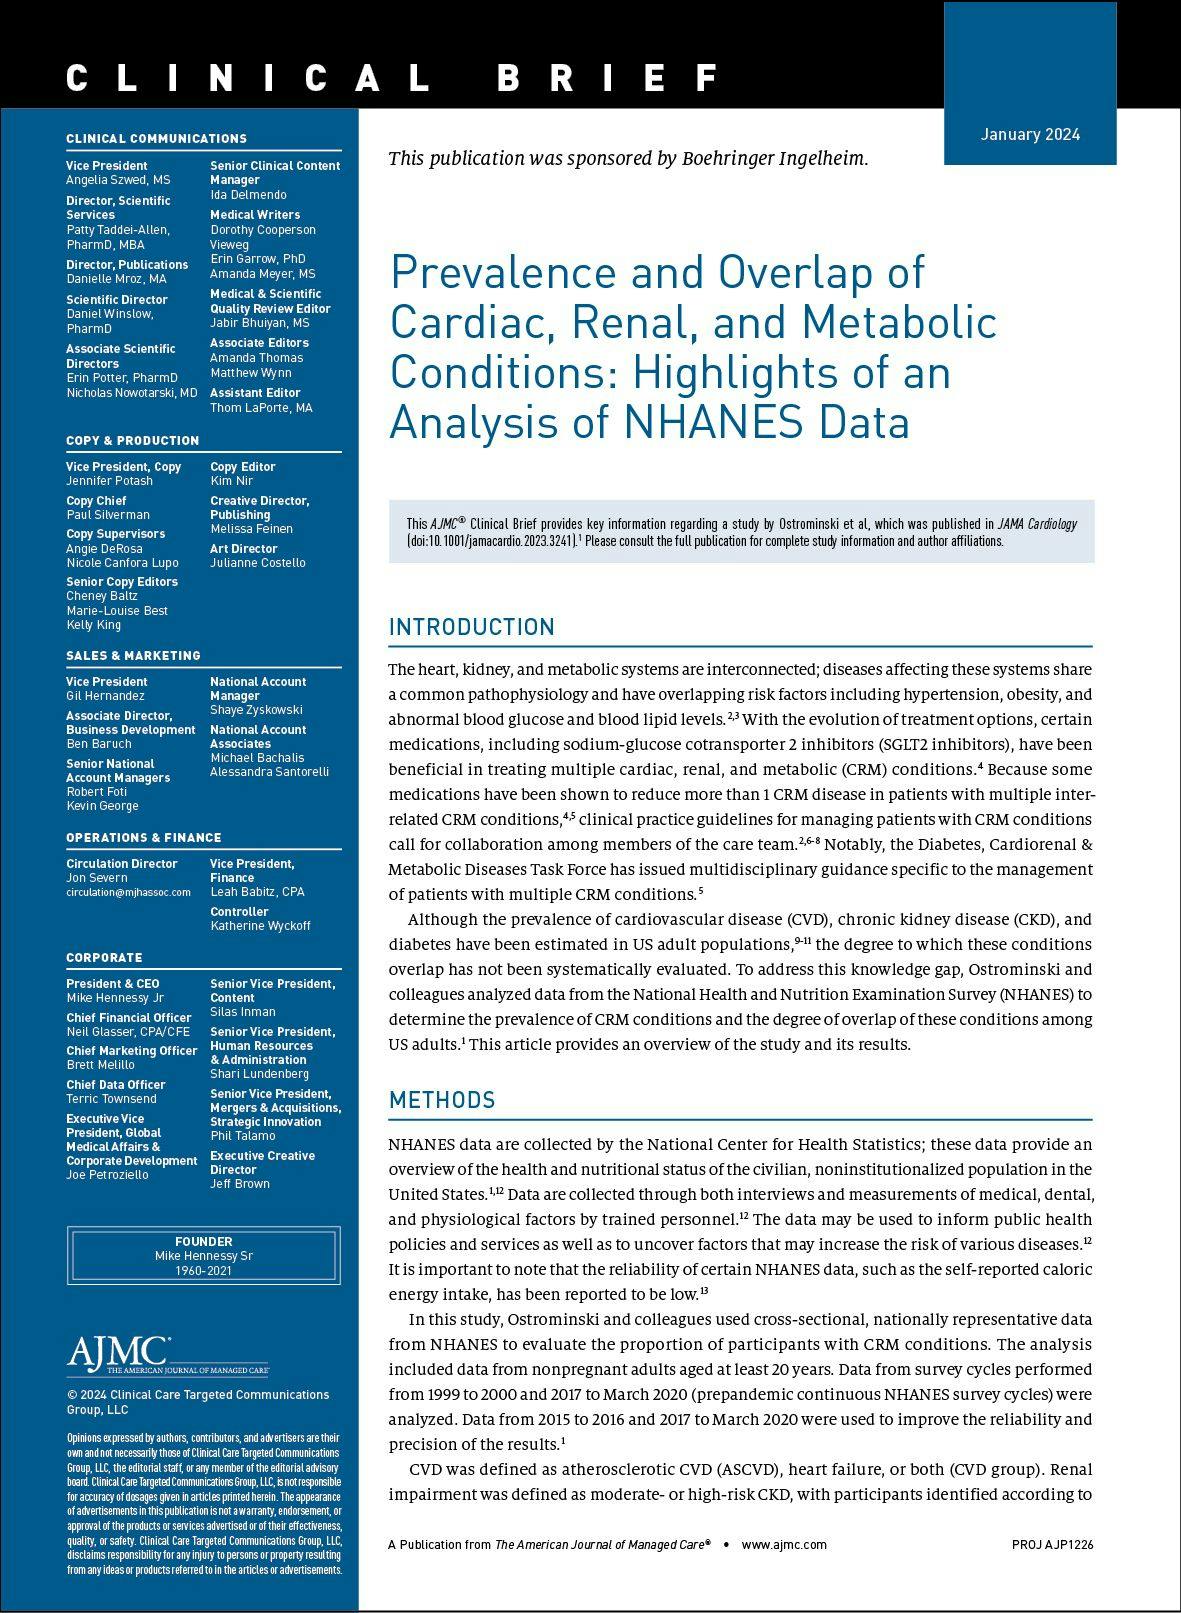 Prevalence and Overlap of Cardiac, Renal, and Metabolic Conditions: Highlights of an Analysis of NHANES Data